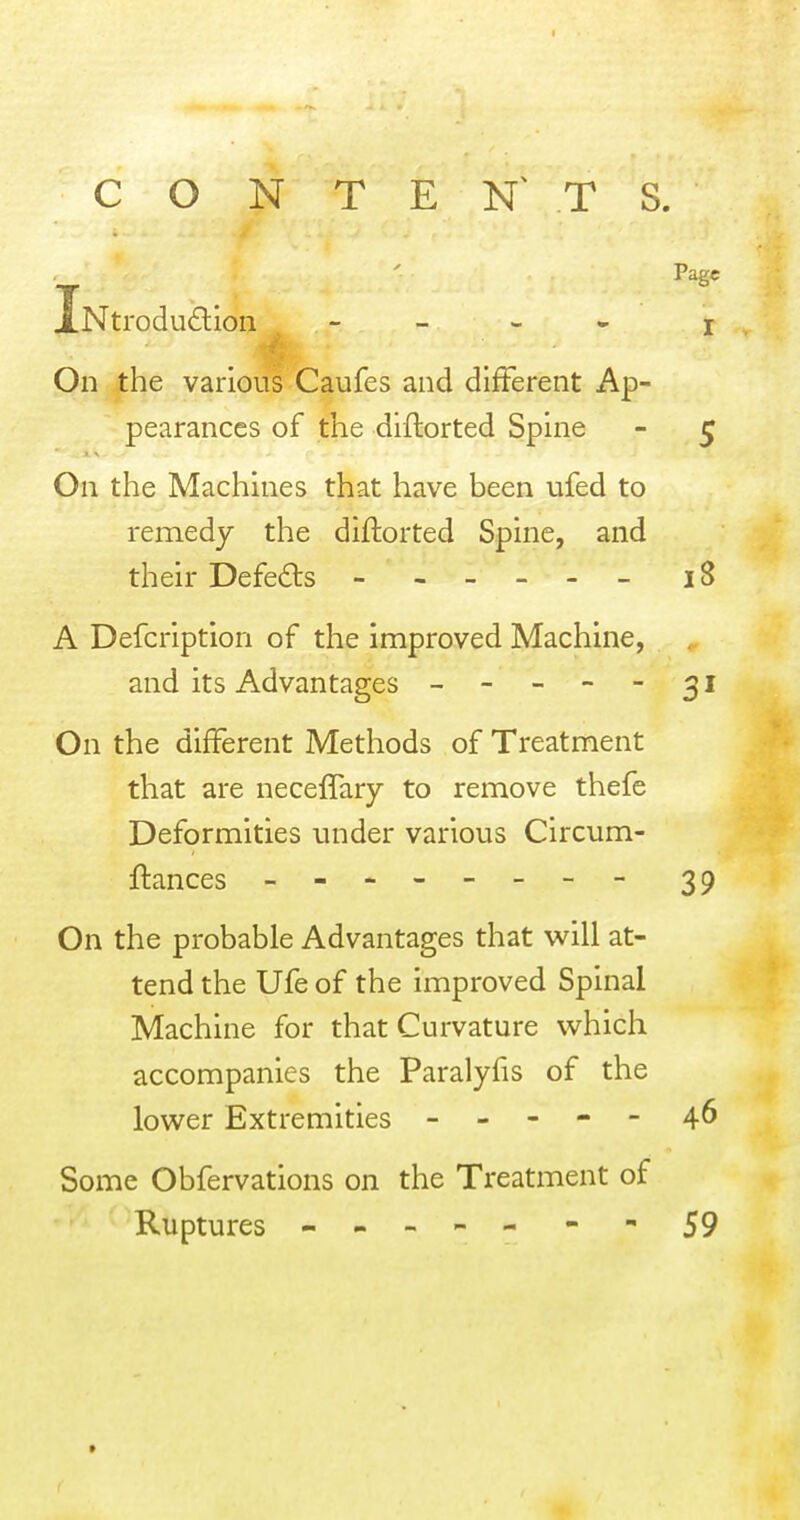 CONTENTS. iNtrodudioii - - - • On the various Caufes and different Ap- pearances of the diftorted Spine On the Machines that have been ufed to remedy the diftorted Spine, and their Defeats - , - _ - - A Defcription of the improved Machine, and its Advantages - - - - - On the different Methods of Treatment that are necelfary to remove thefe Deformities under various Circum- ftances - -- -- -- - On the probable Advantages that will at- tend the Ufe of the improved Spinal Machine for that Curvature which accompanies the Paralyfis of the lower Extremities - - - - - Some Obfervations on the Treatment of Ruptures